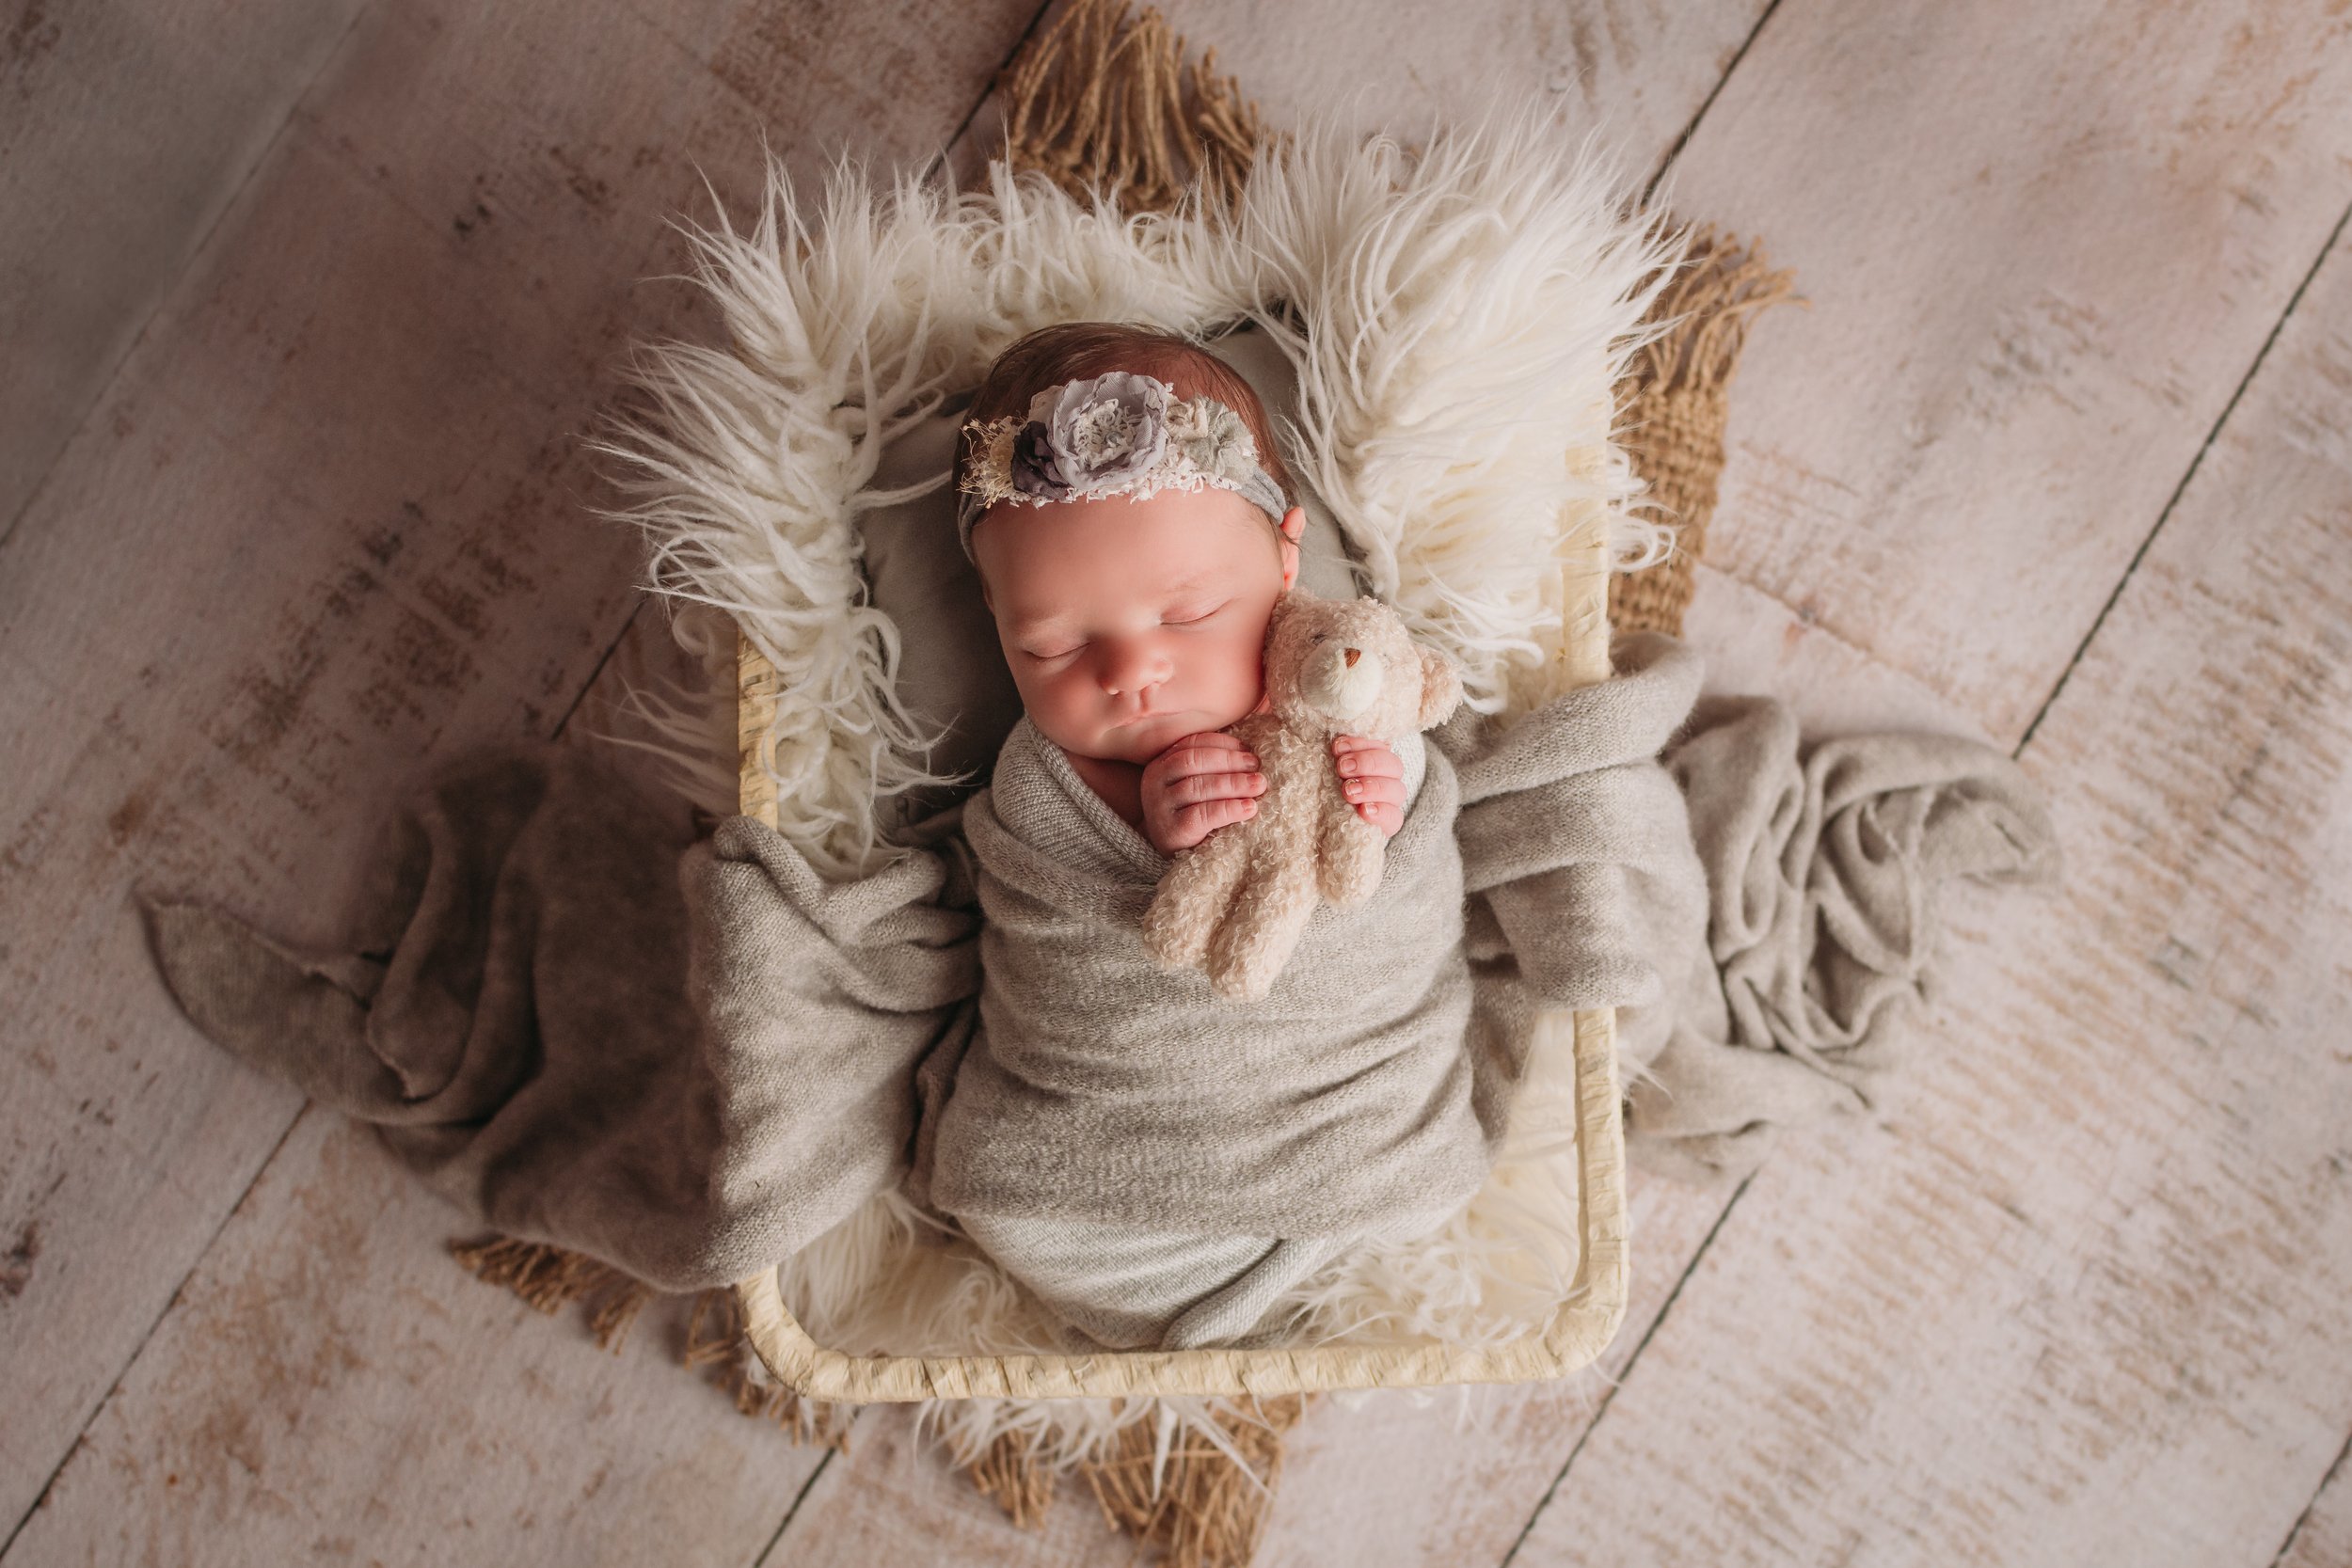 Sweet and innocent newborn baby pictures